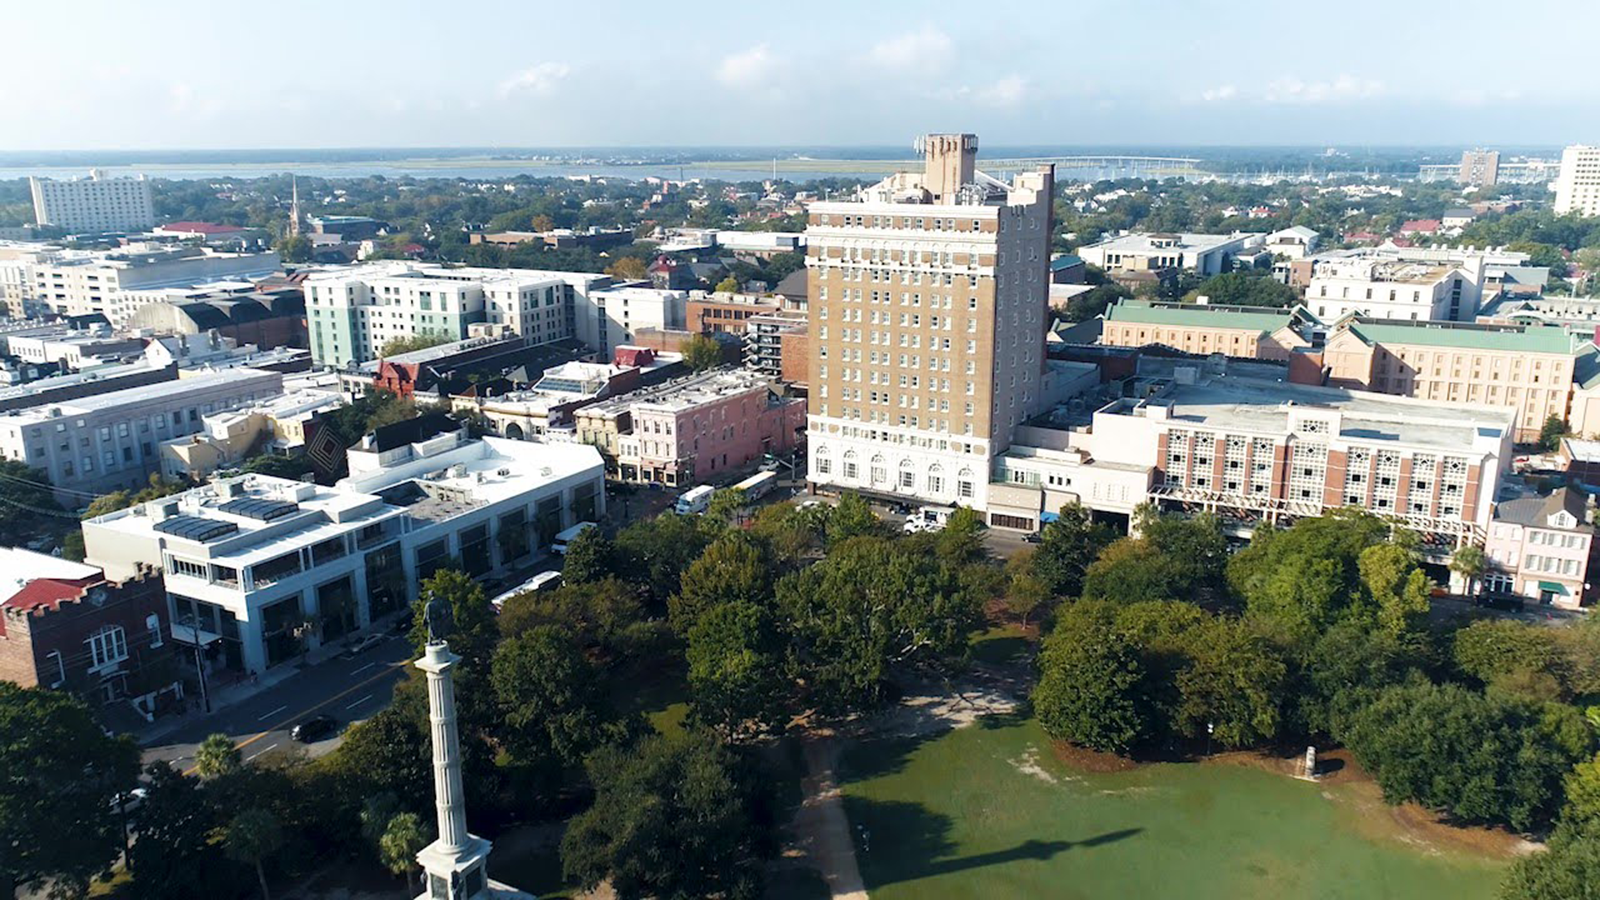 Discover The Charleston Museum, White Point Garden, the South Carolina Aquarium, and Marion Square within walking distance of the hotel.